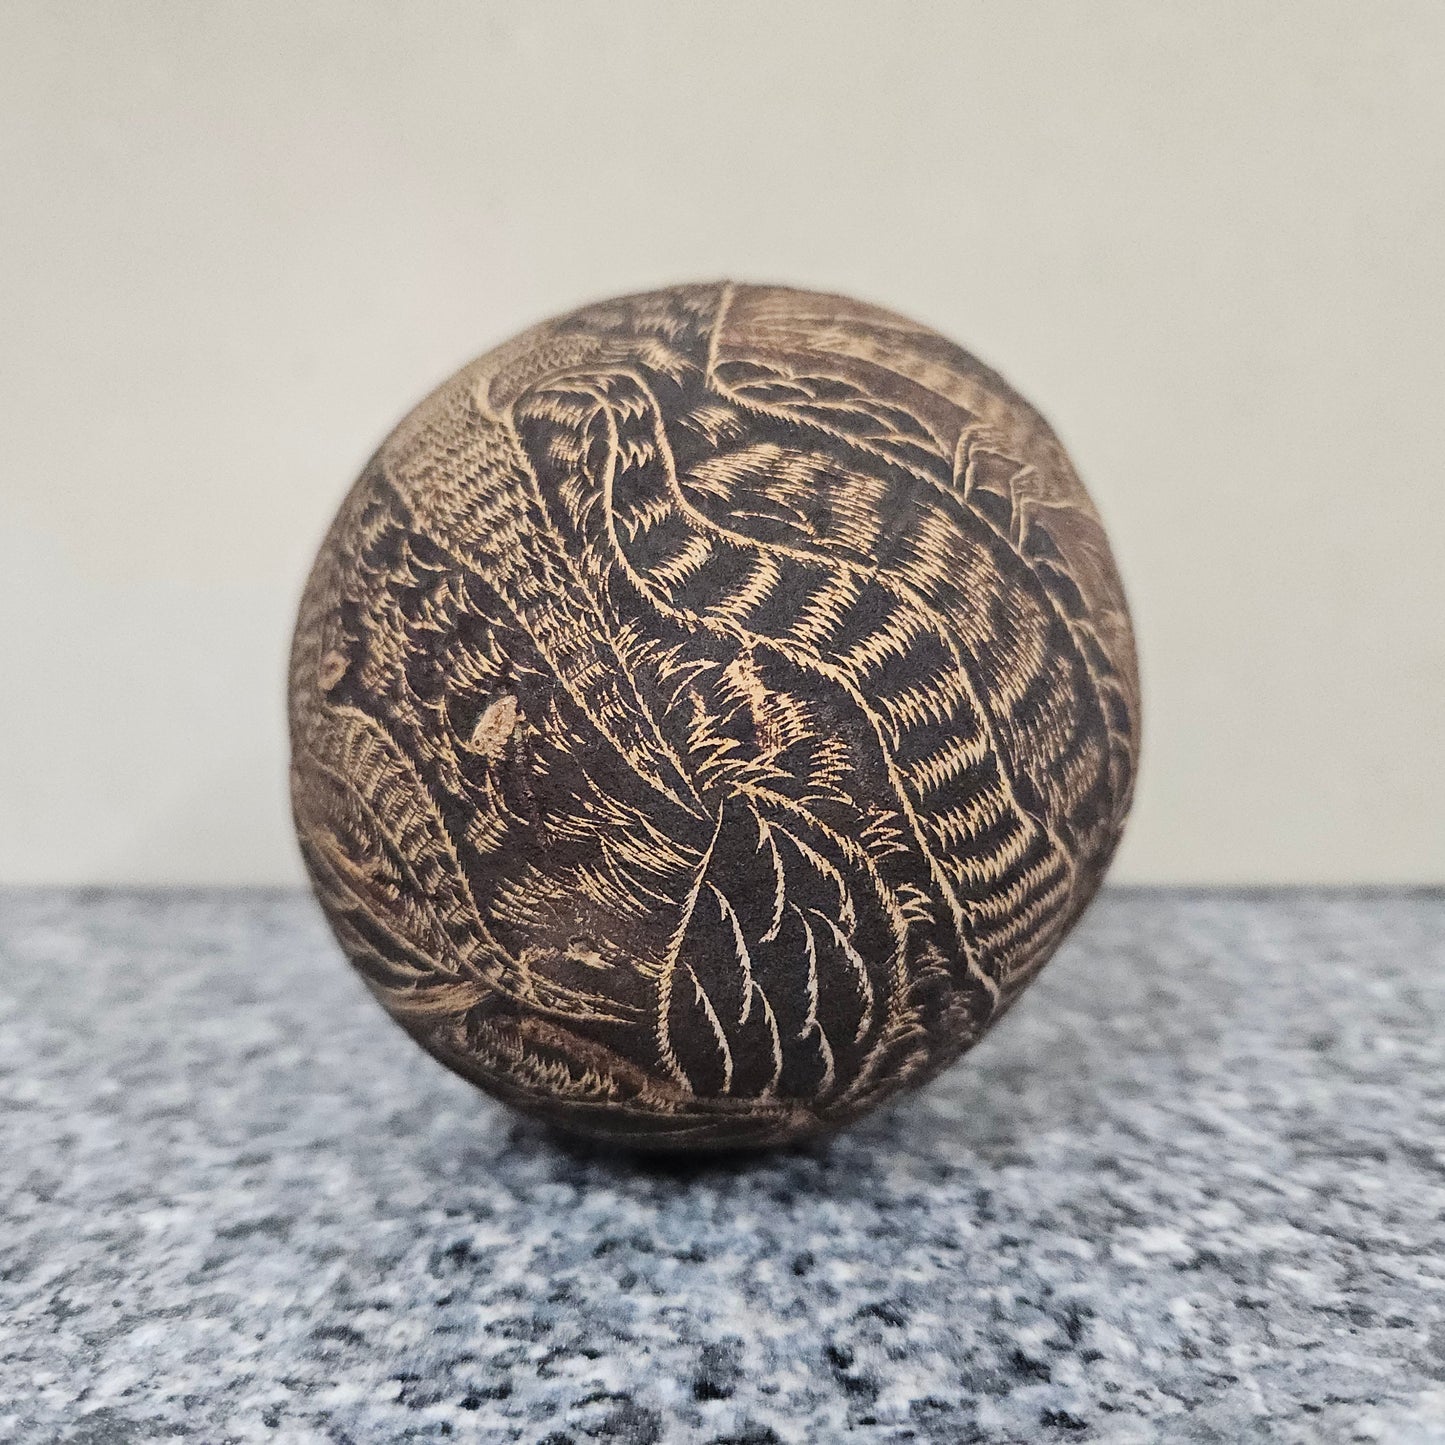 Engraved Boab-Tree Nut 1950's